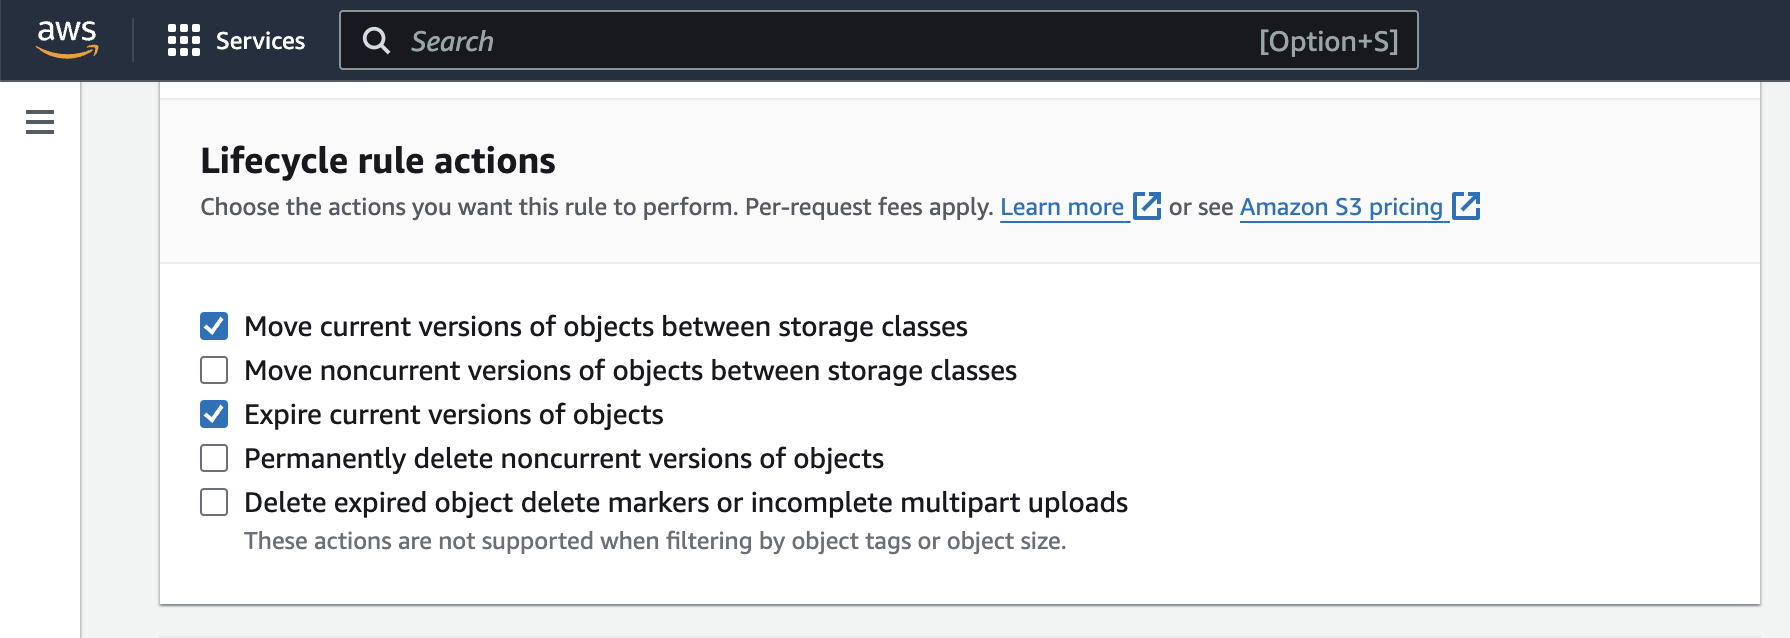 Screenshot of lifecycle rule action in AWS console.